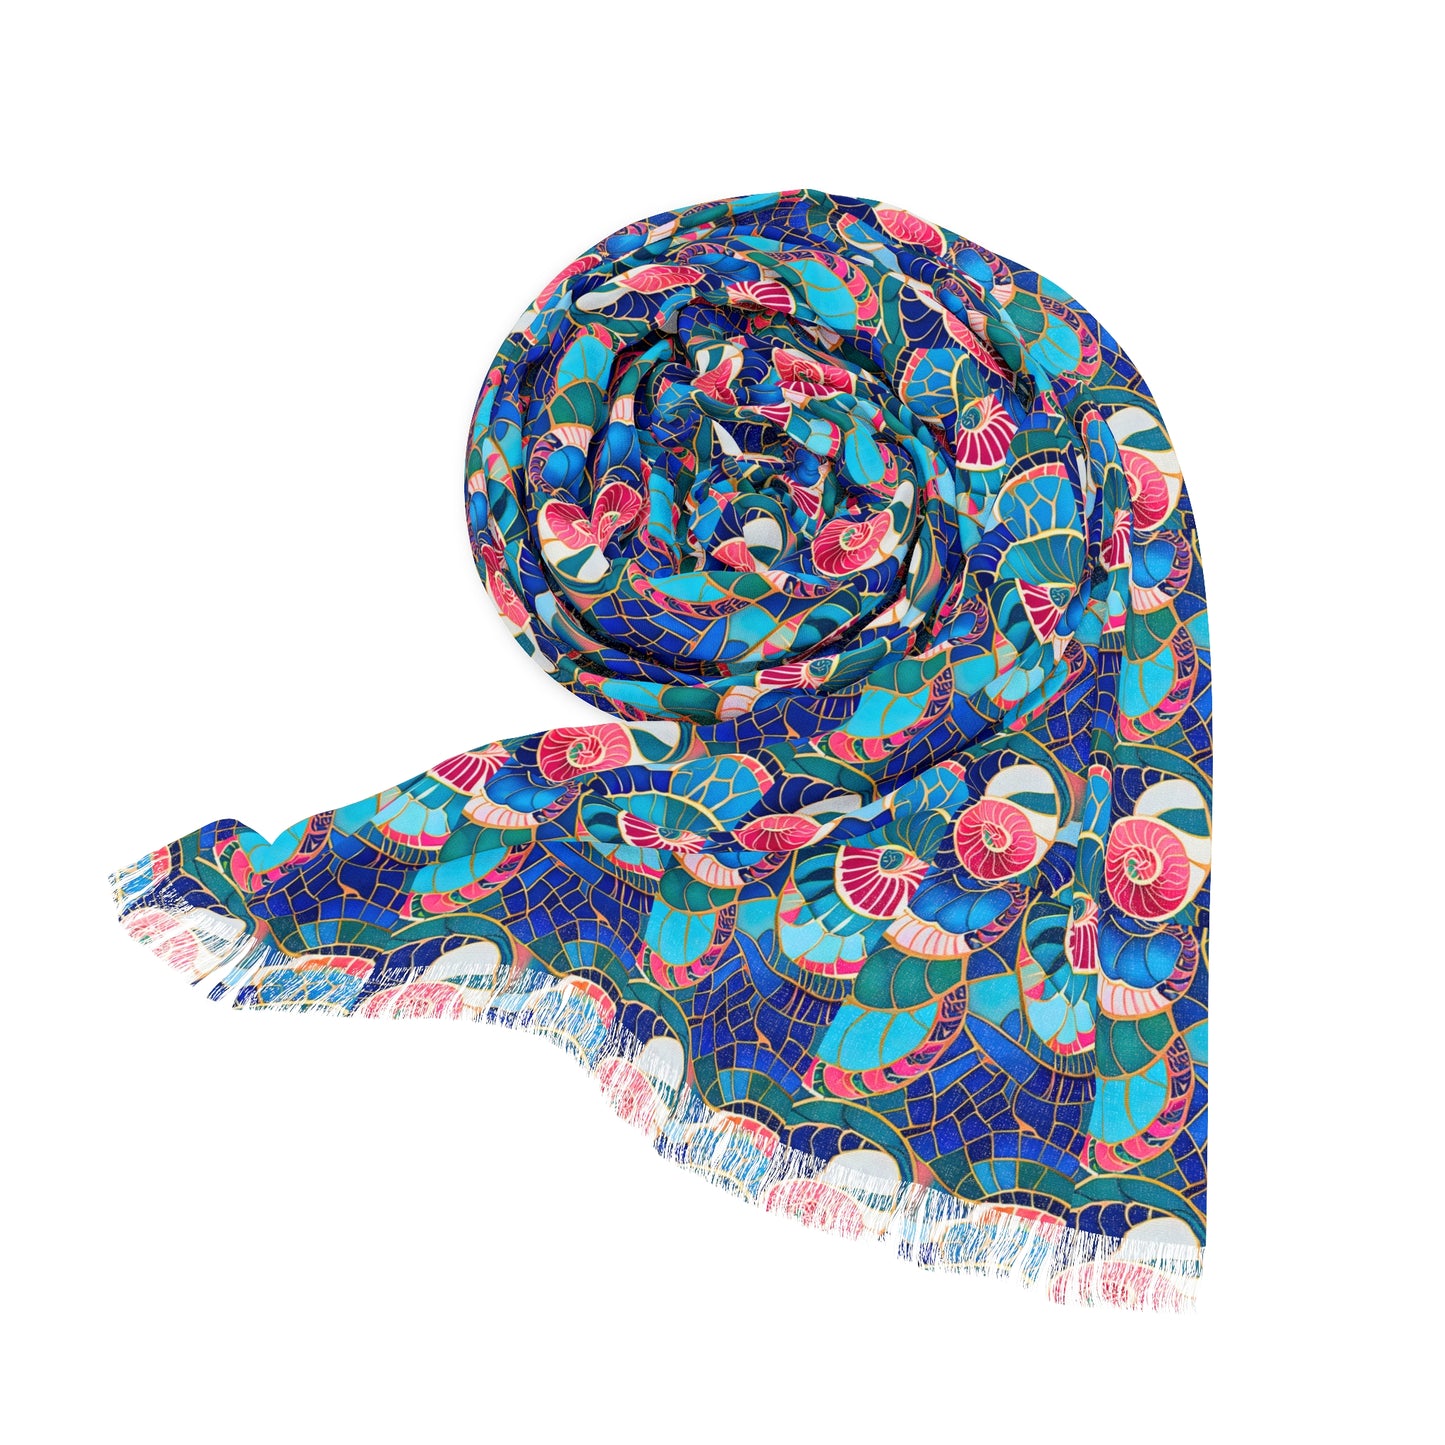 Cloisonne Sea Shell Decorative Fashion Accent Light Scarf with Fringe